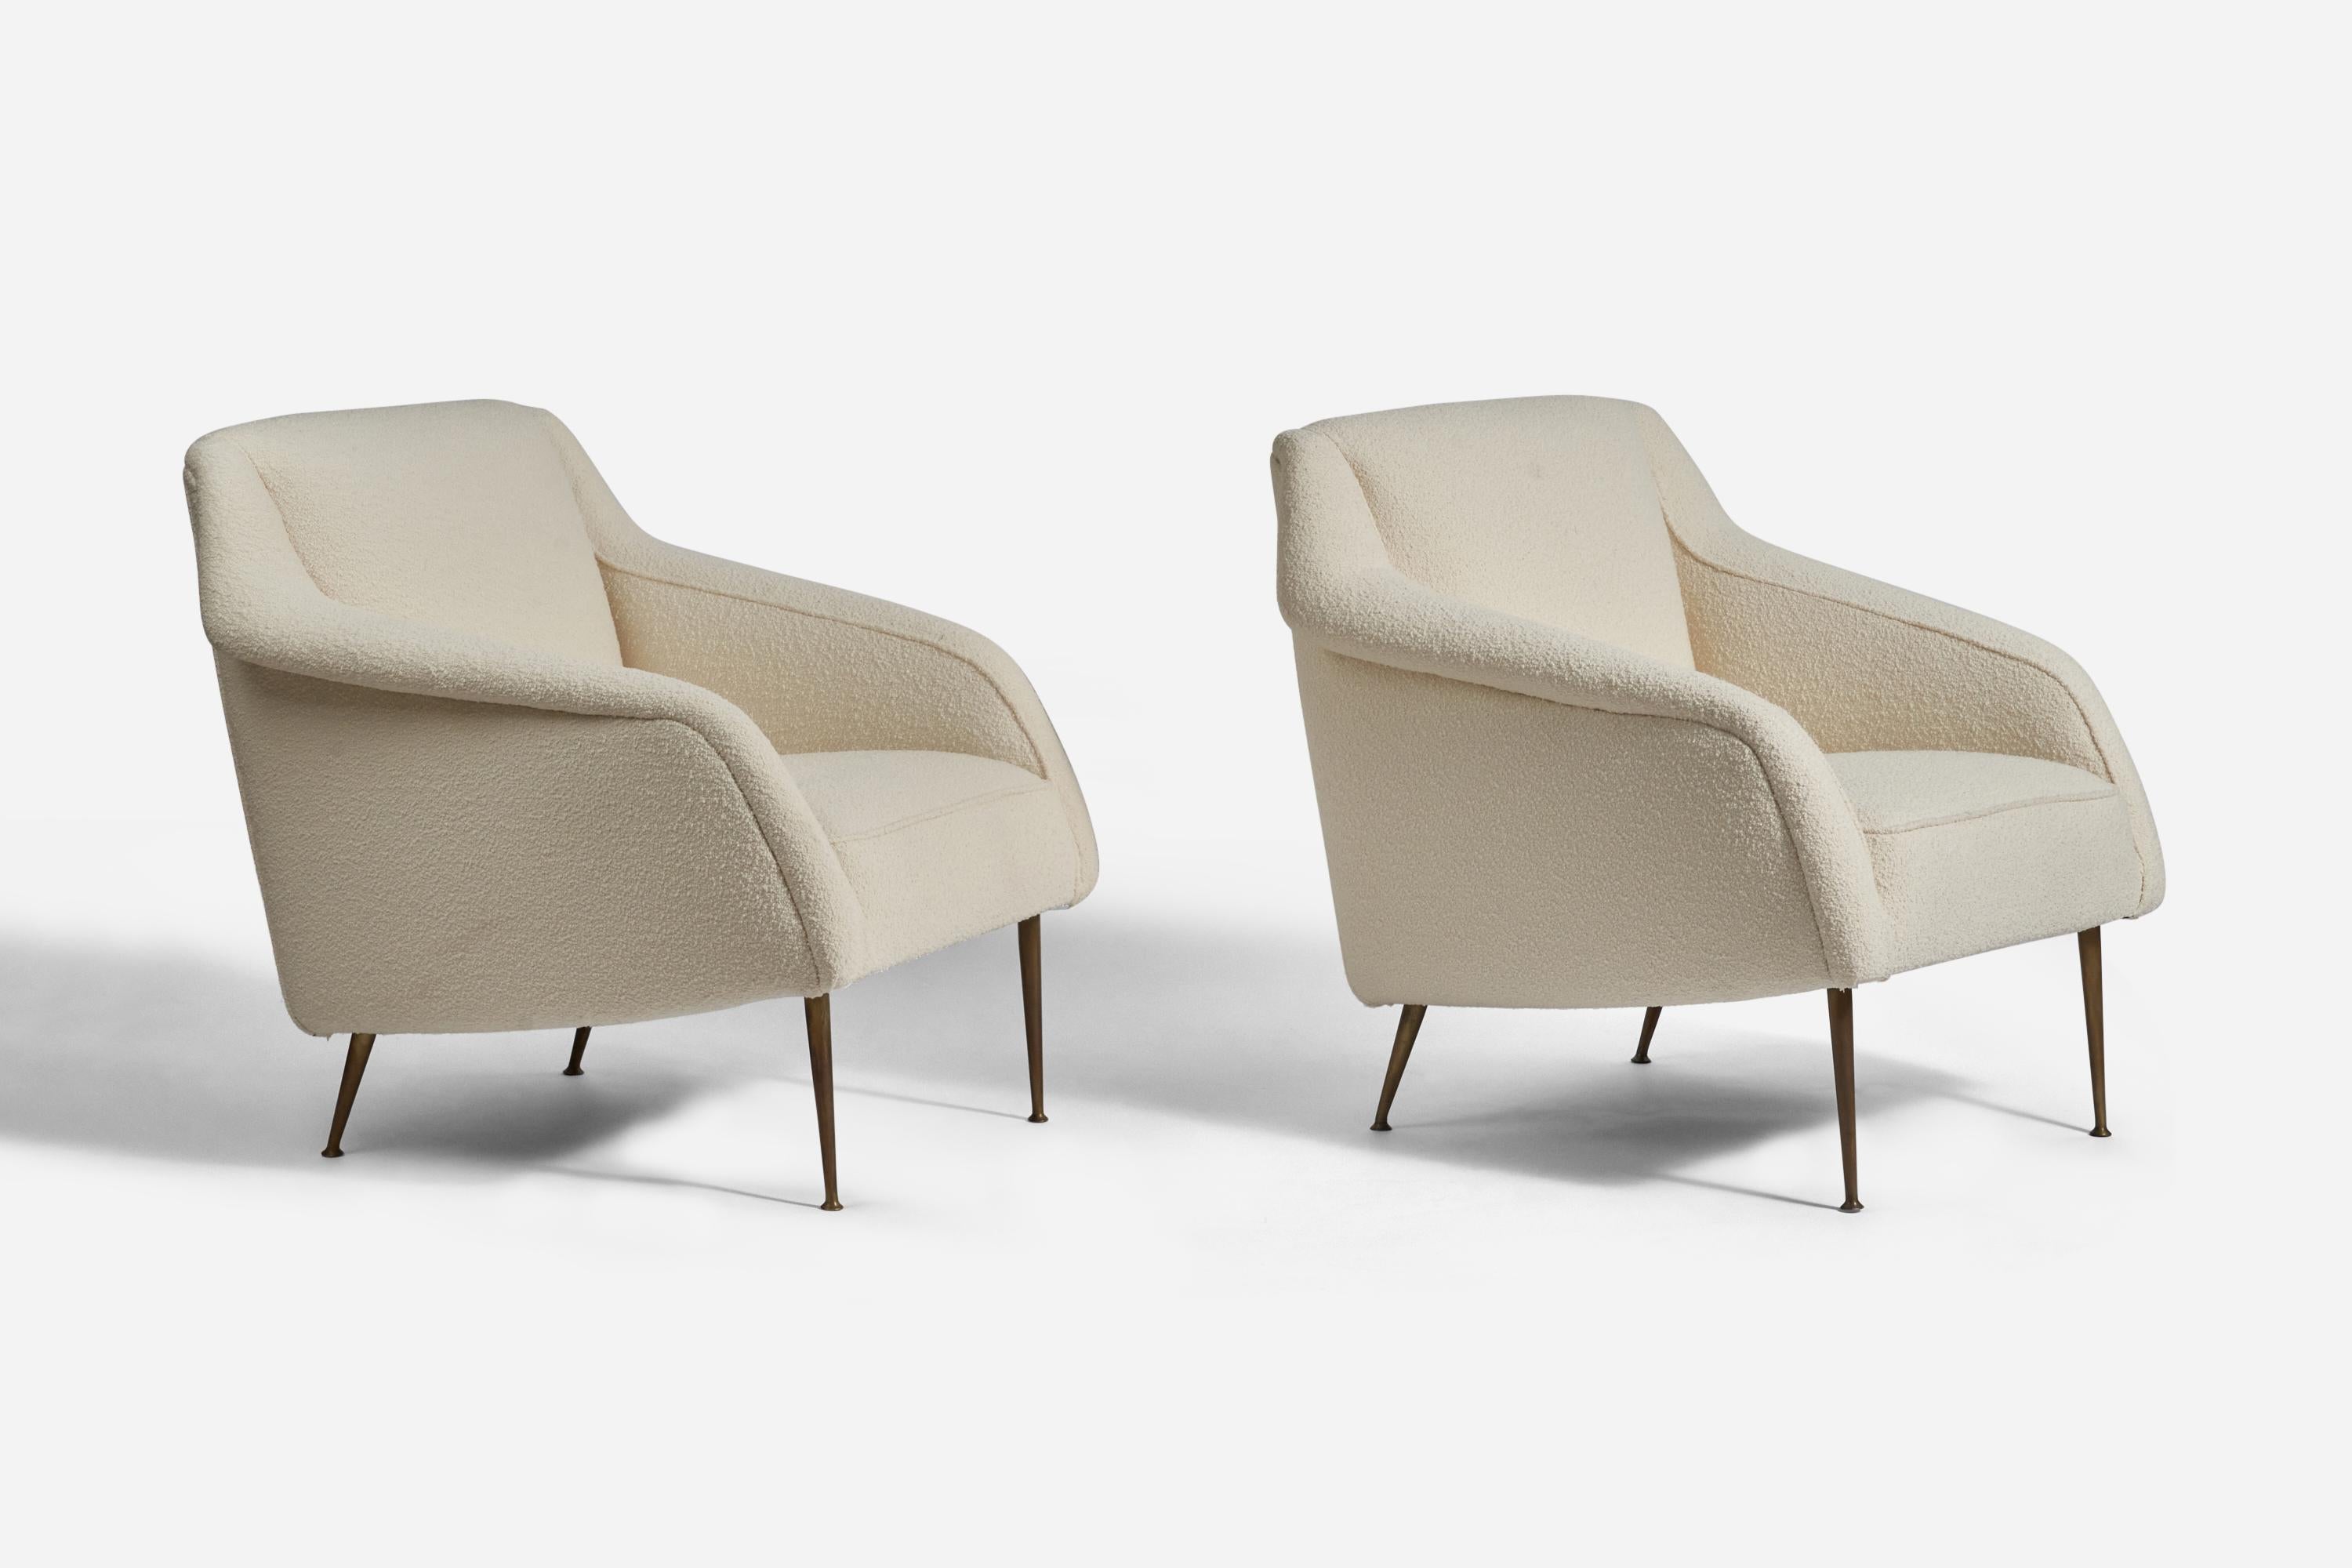 A pair of white bouclé and brass lounge chairs designed by Carlo De Carli and produced by Singer & Sons, America, 1950s.

